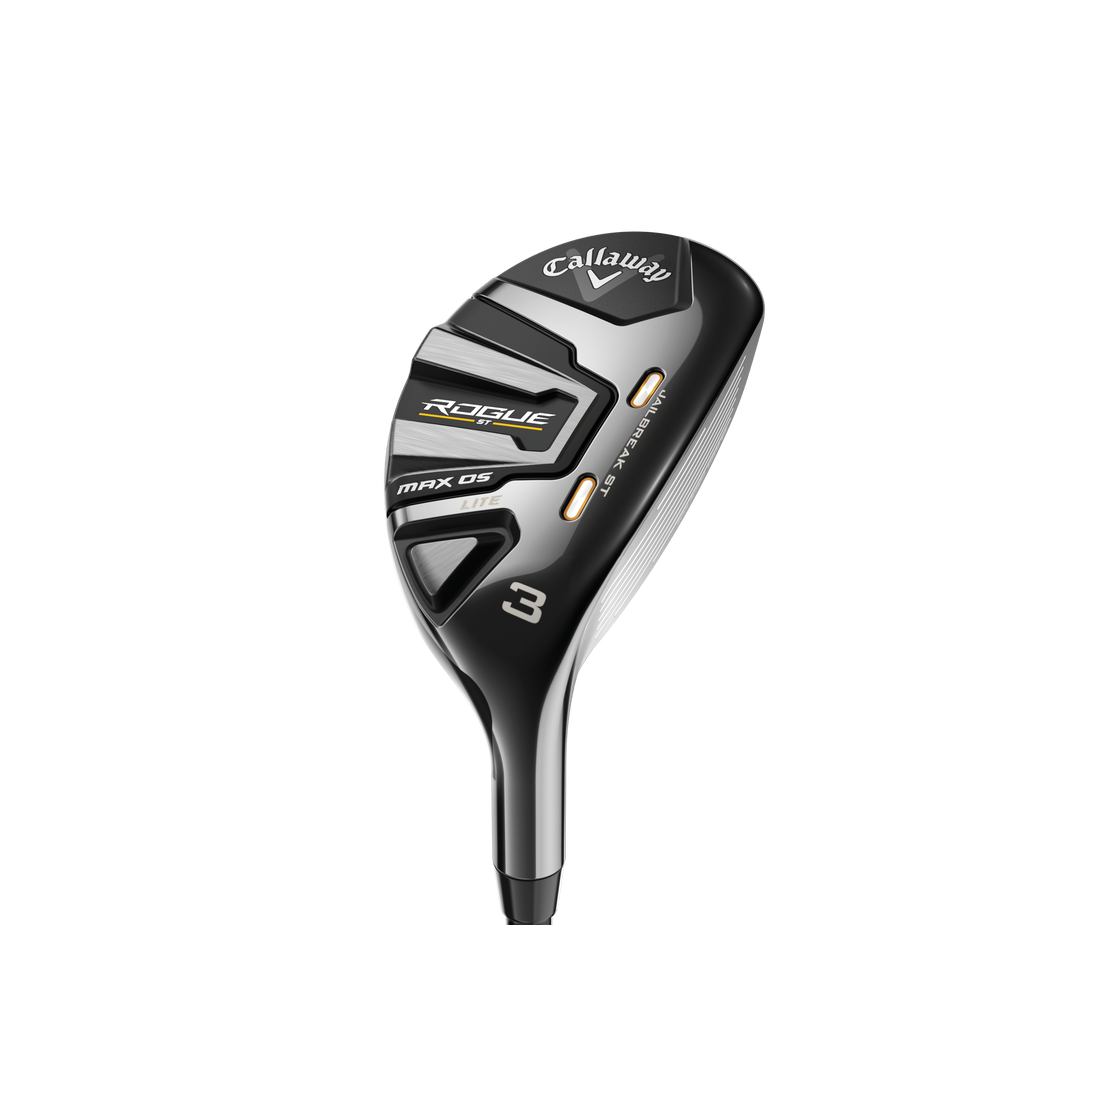 Callaway hybride Rogue ST Max OS Lite lady